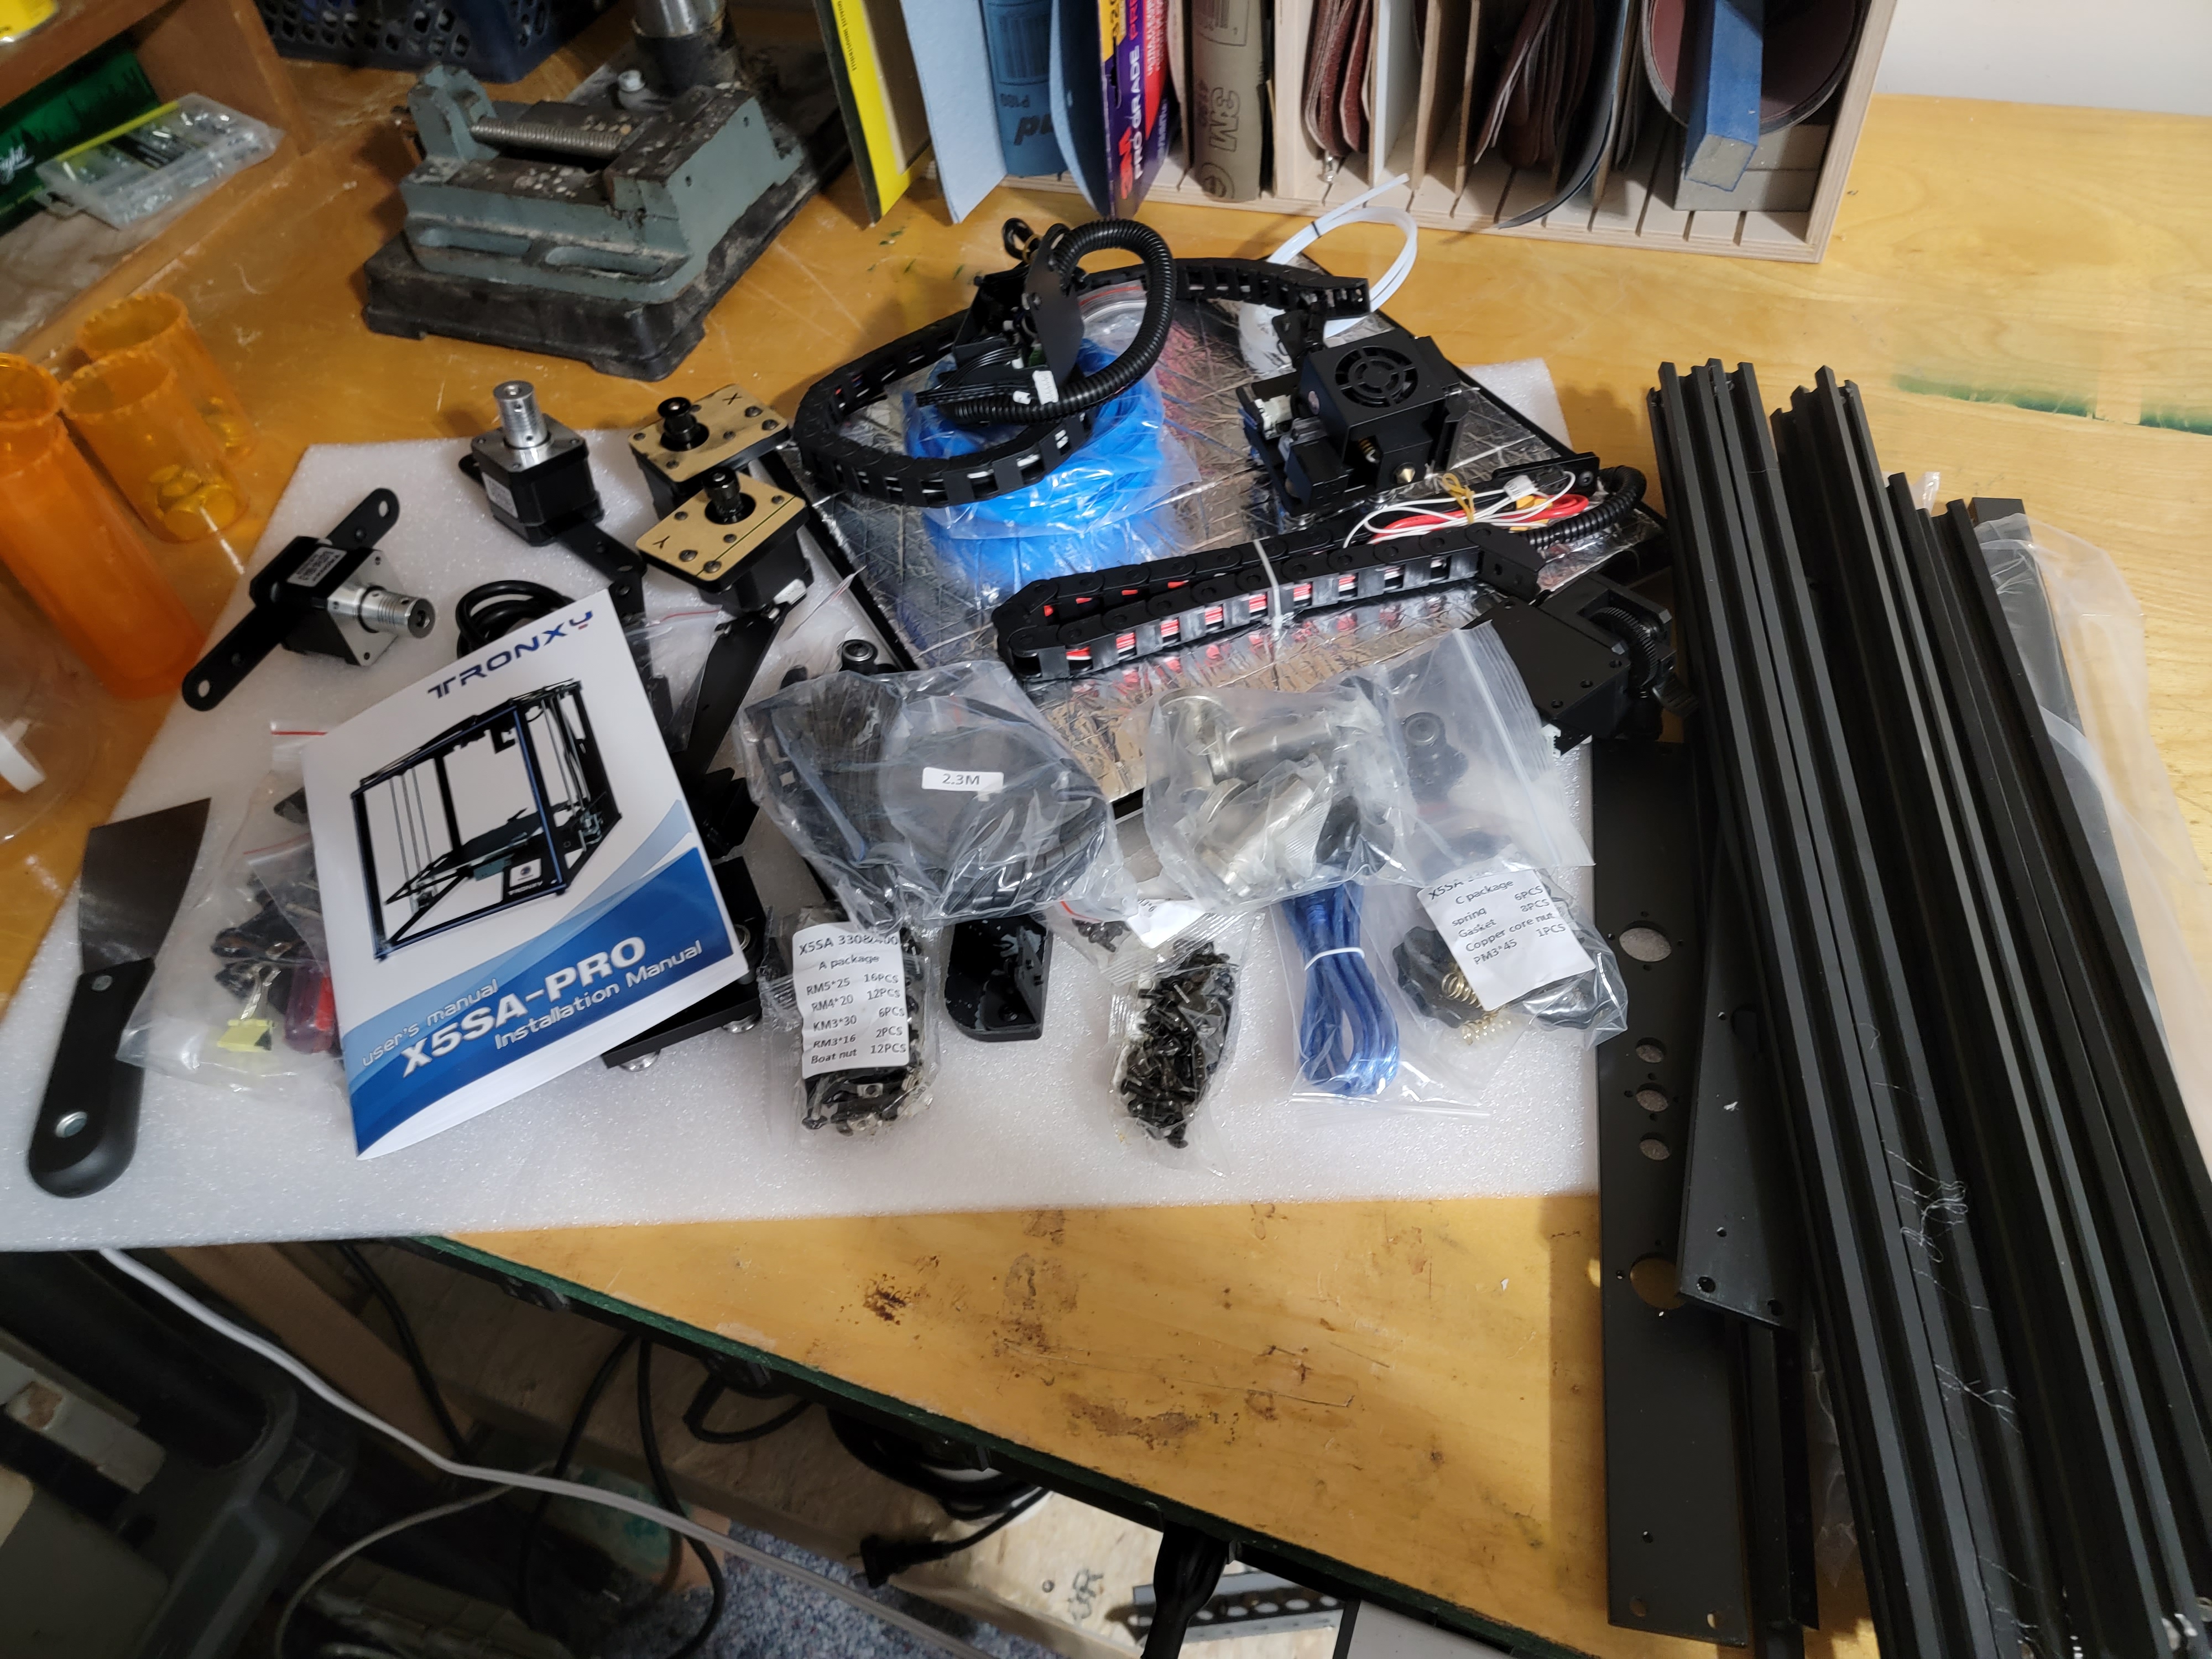 Lots of parts to assemble